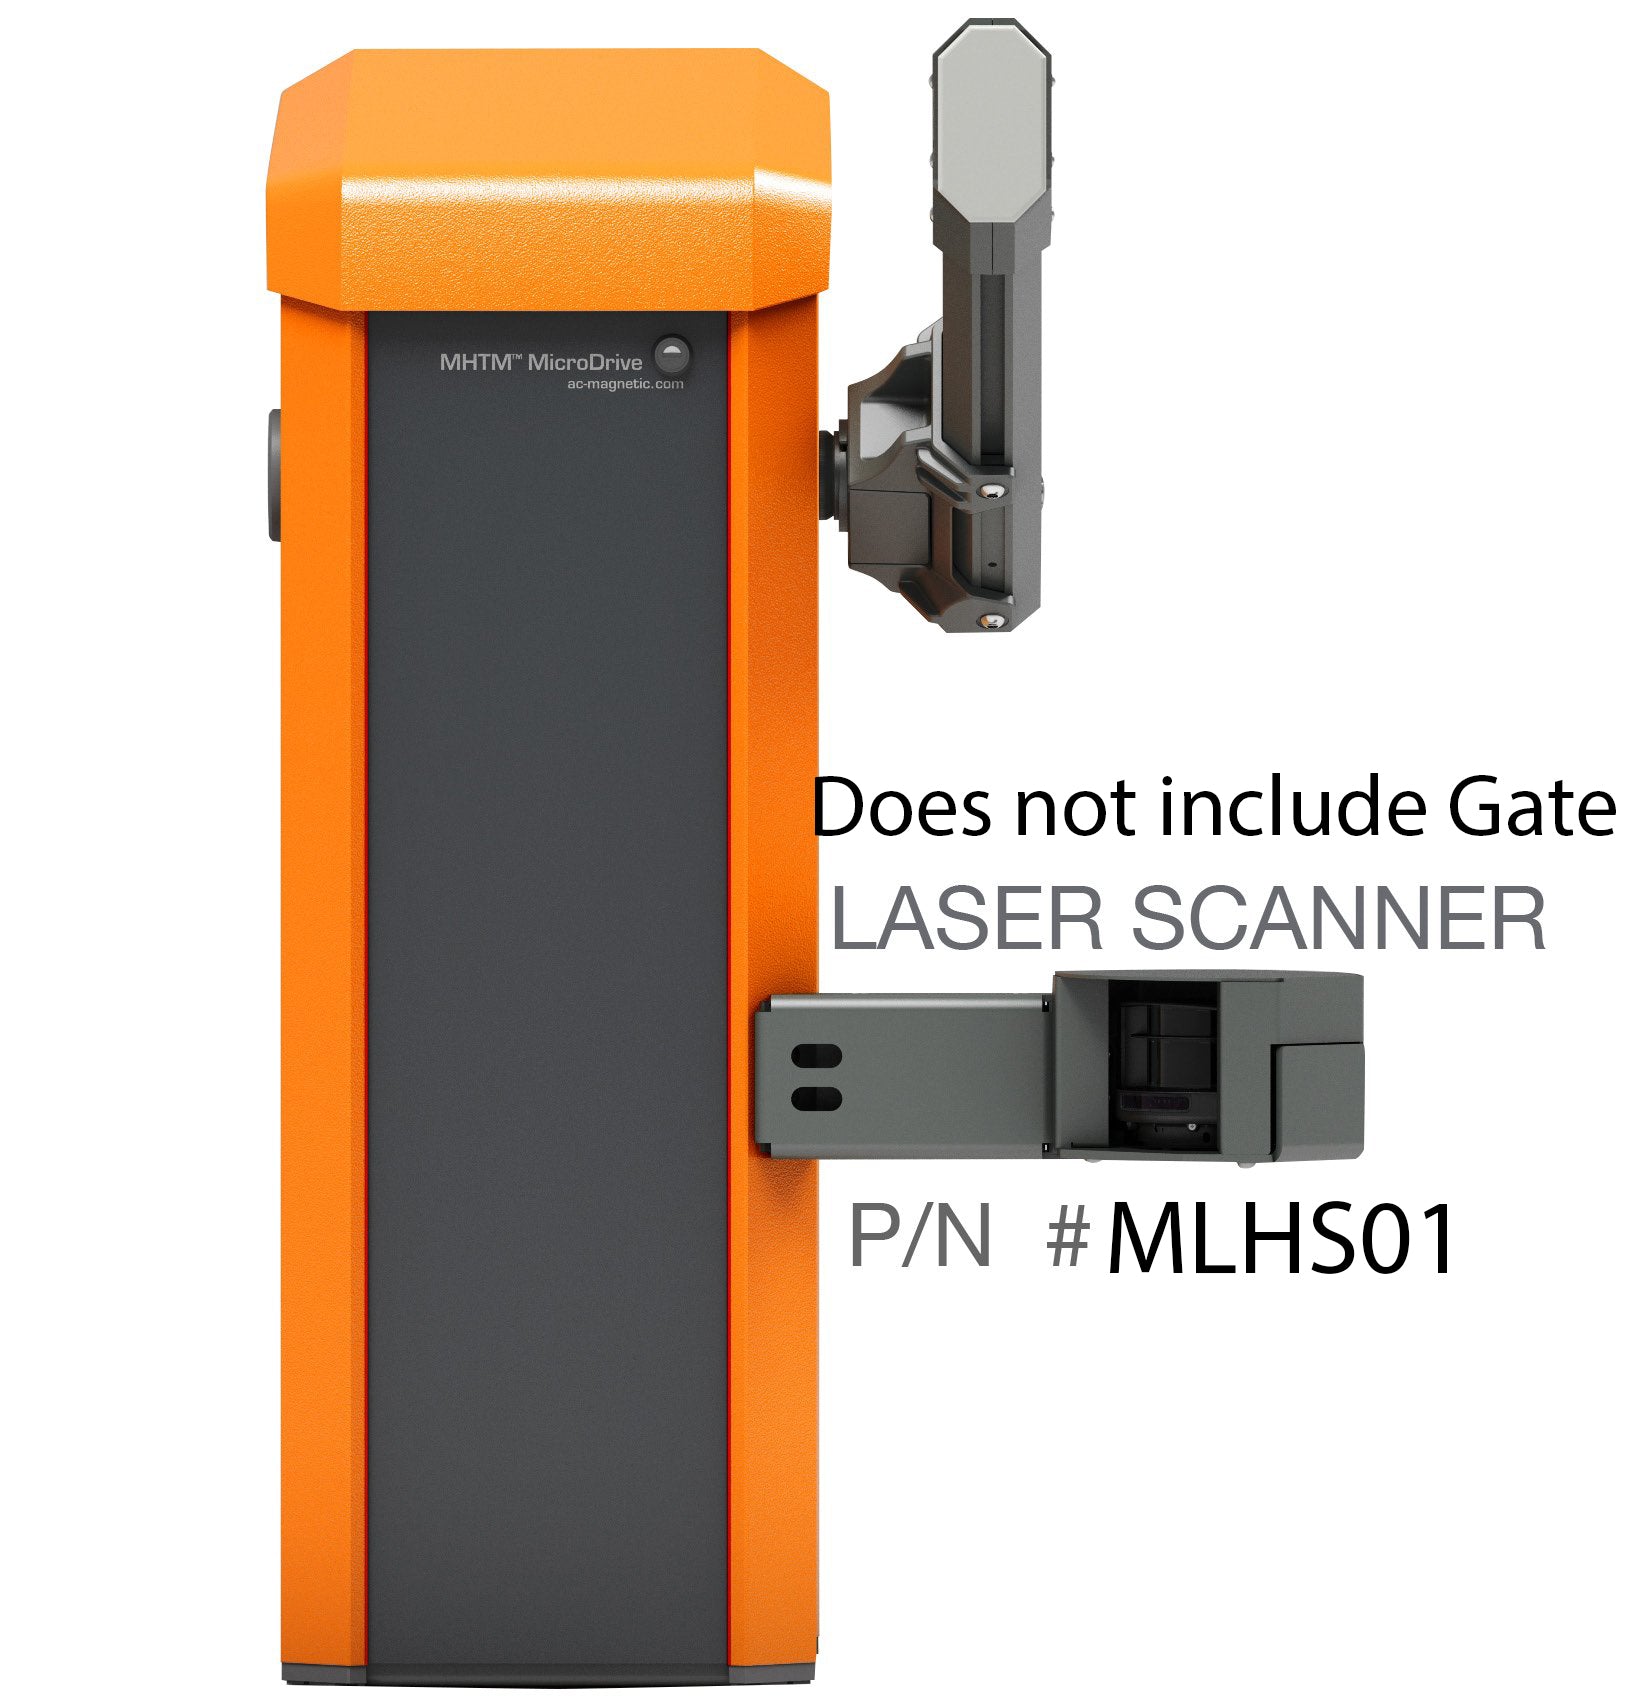 MLHS01 Stand Alone Scanner w/Power supply